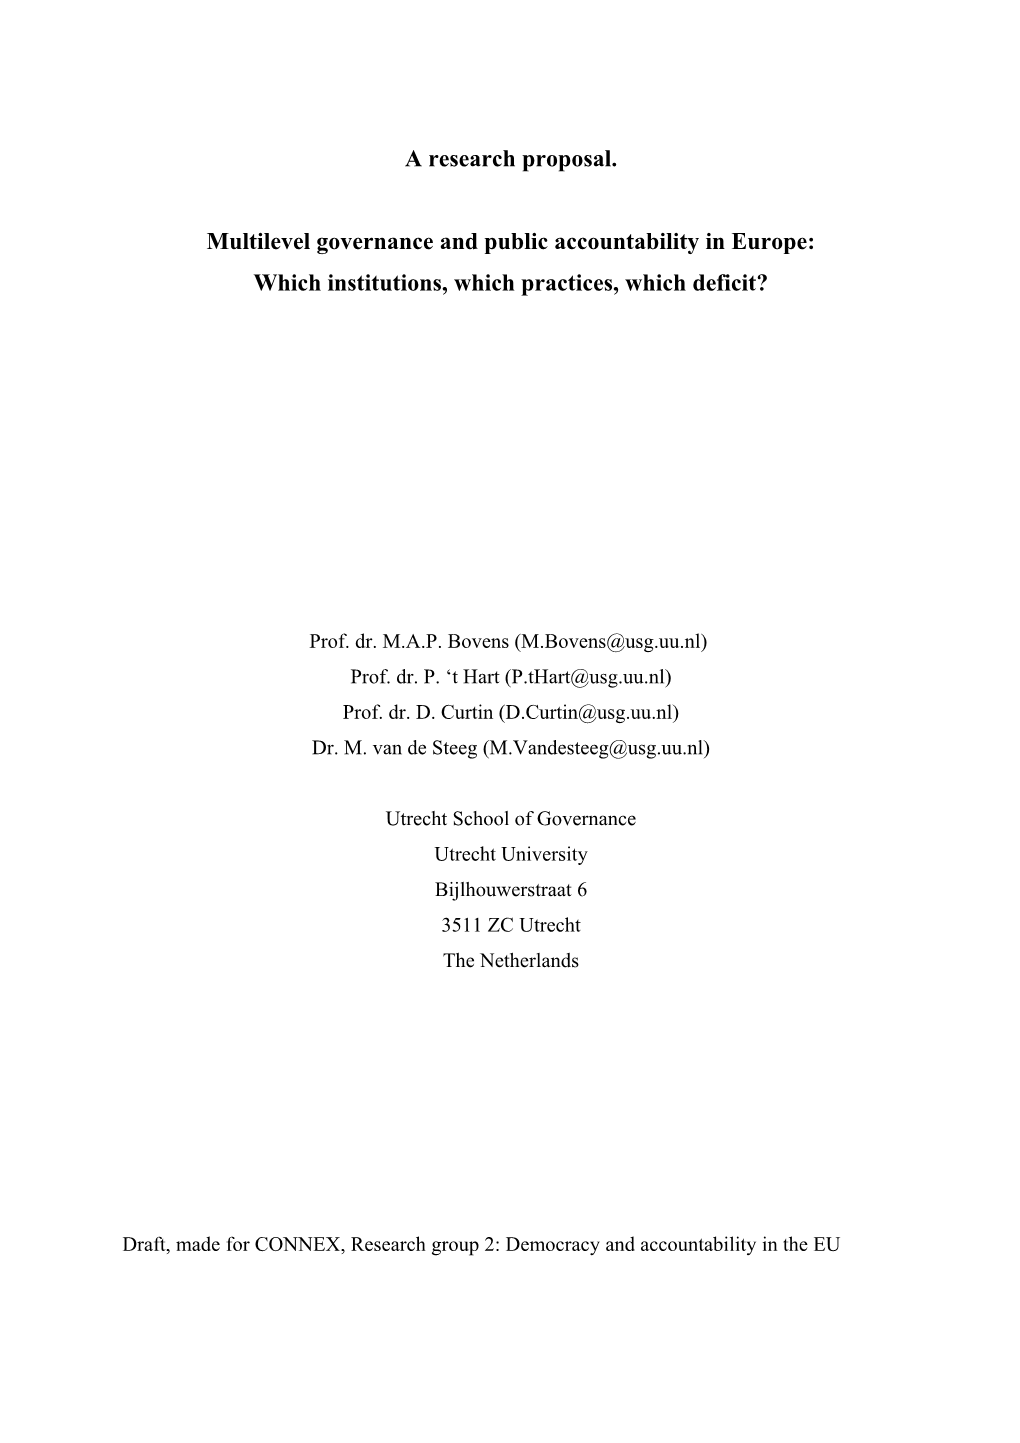 Multilevel Governance and Public Accountability in Europe: Which Institutions, Which Practices